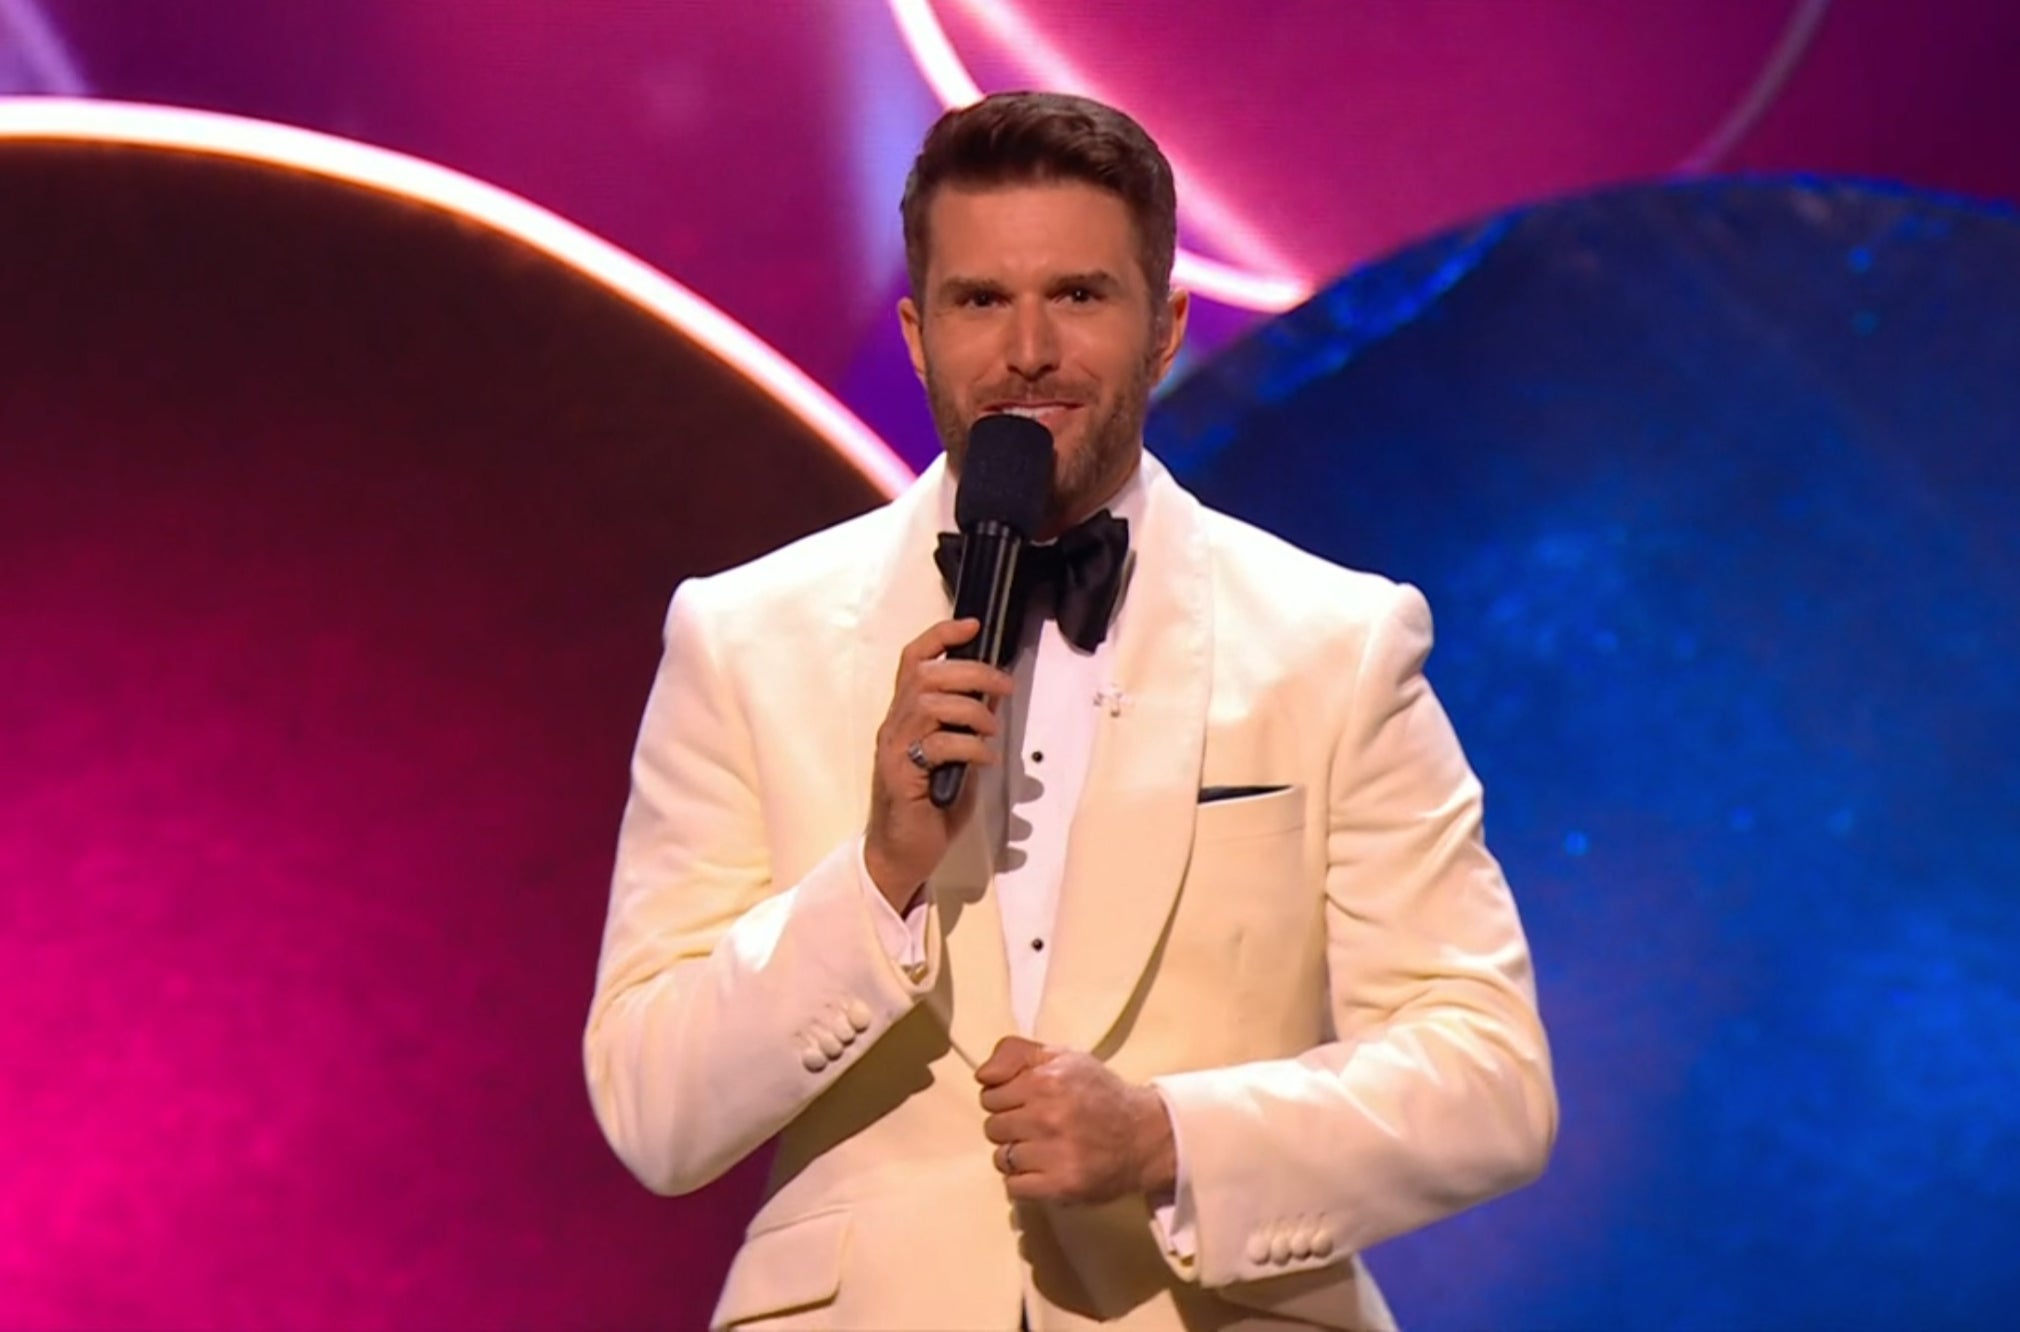 Dommett was as perplexed as viewers by Lancashire’s voice